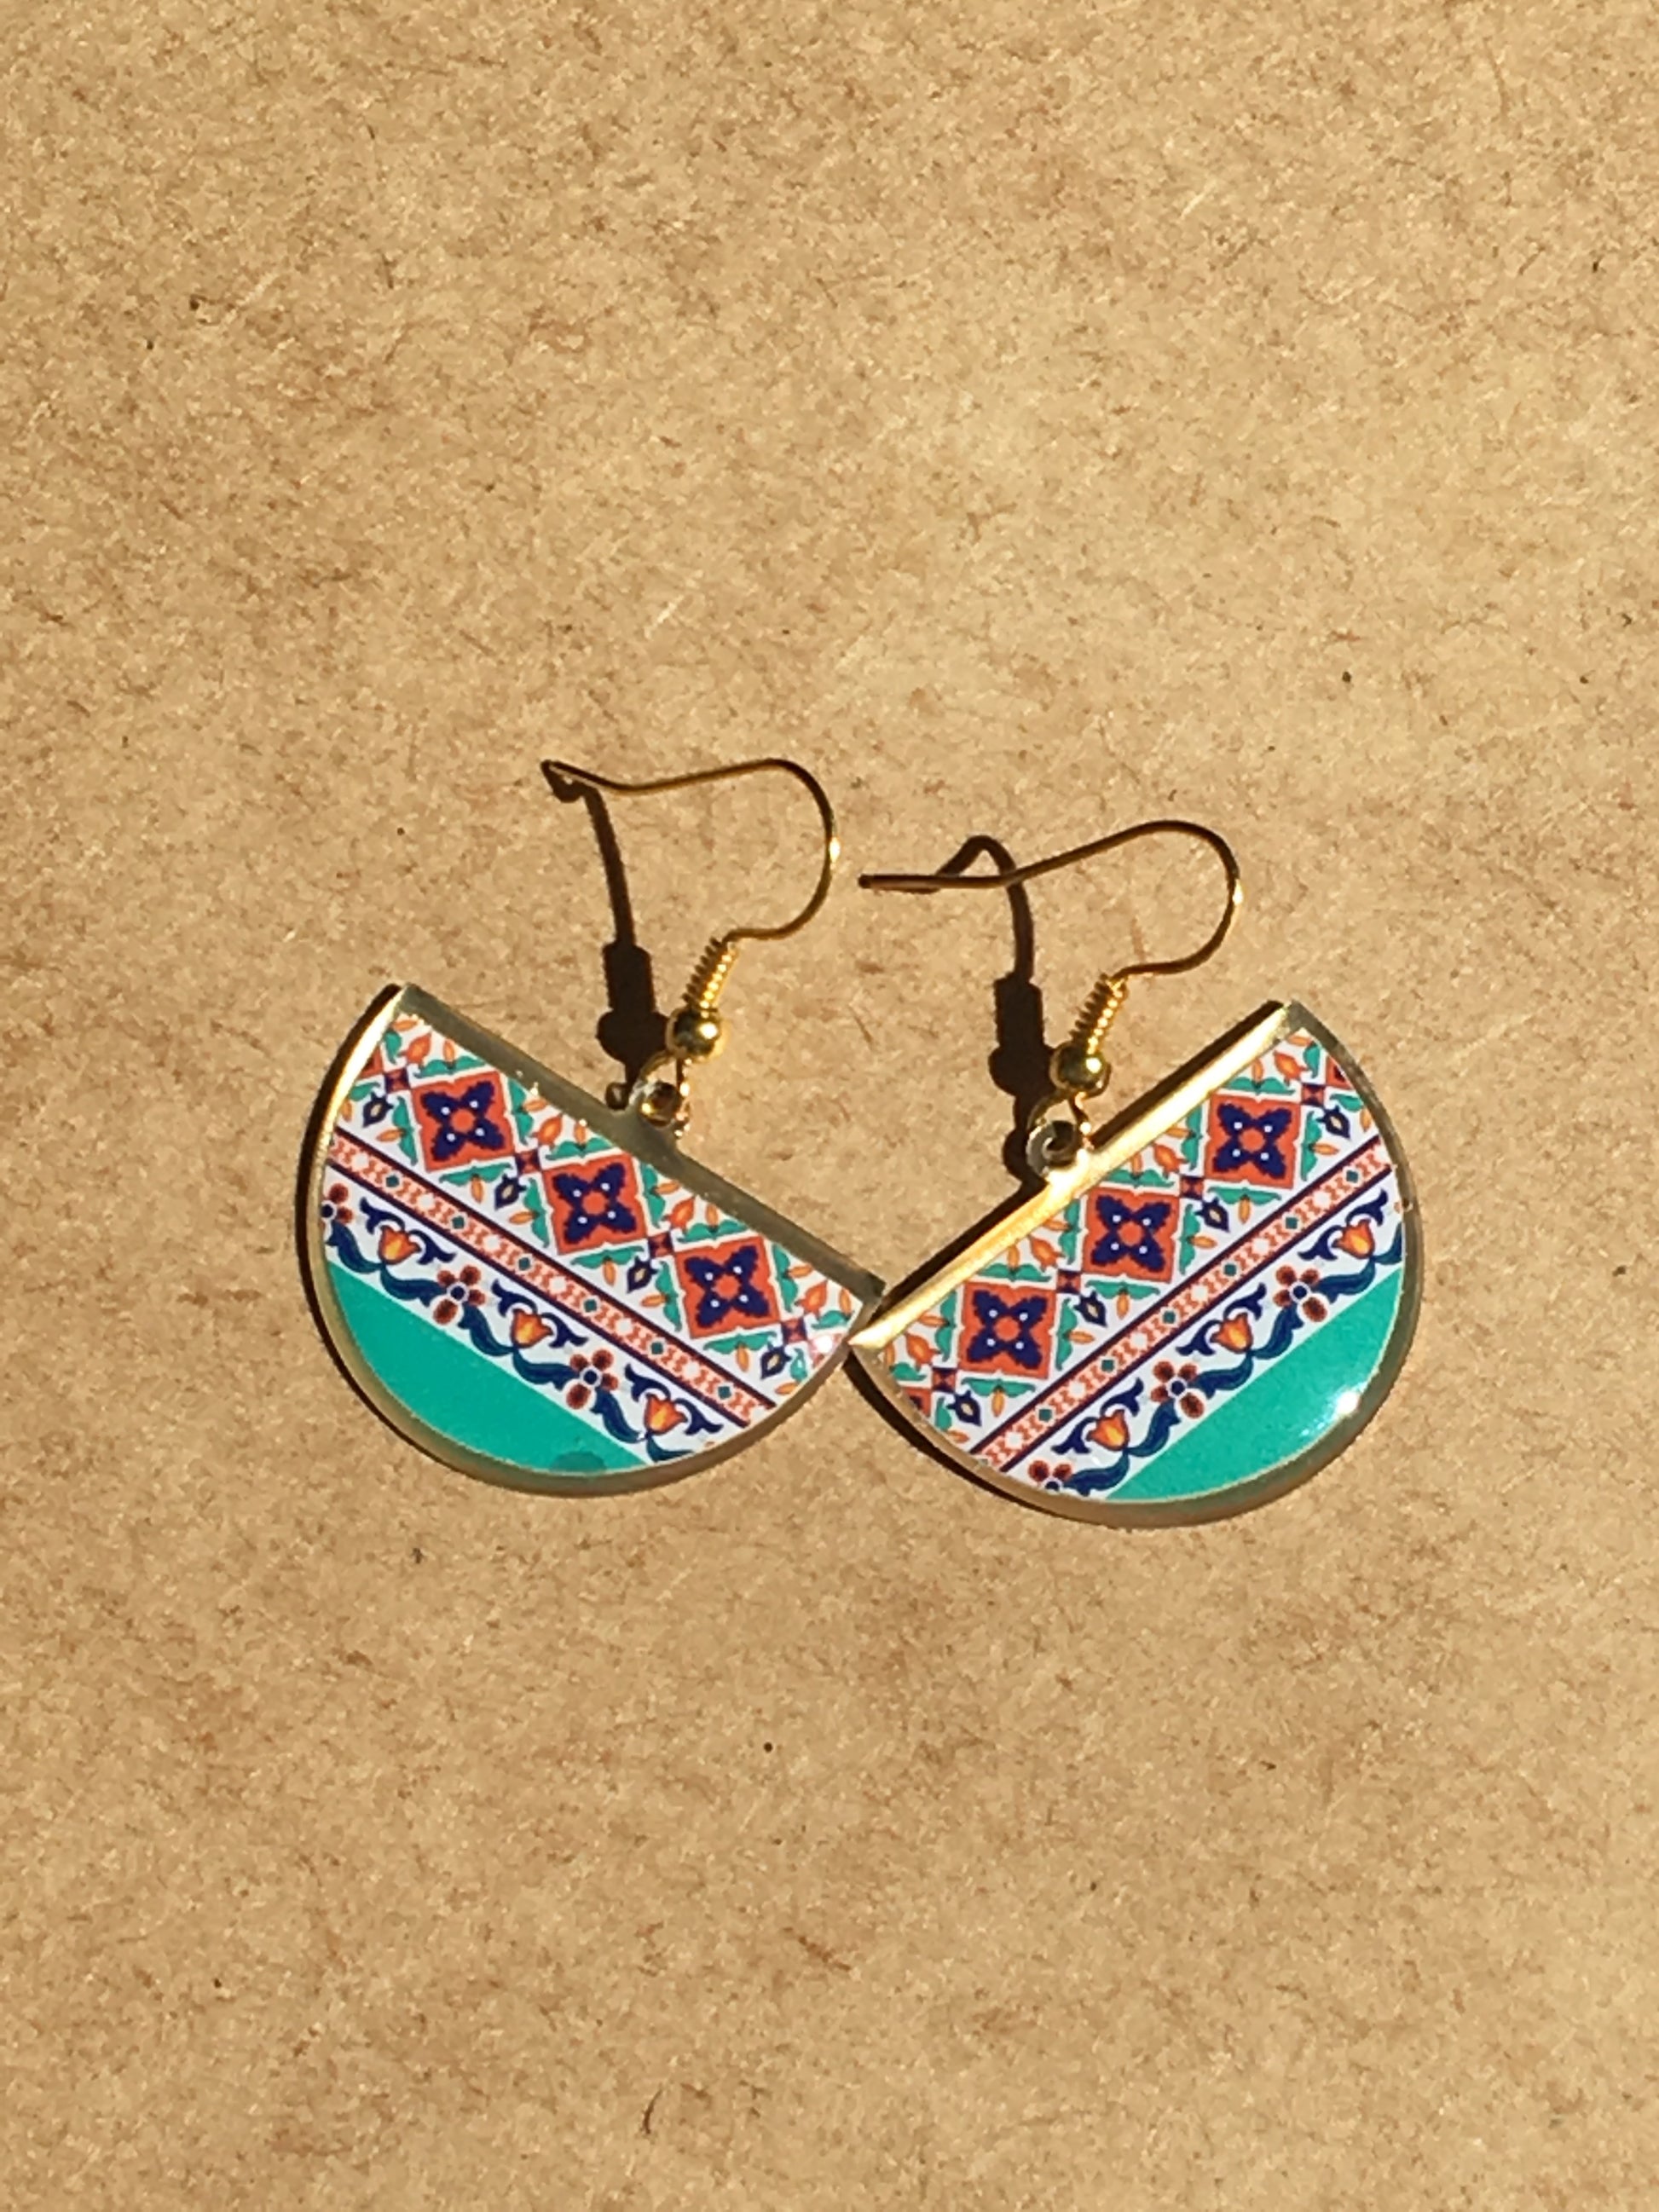 turkish persian pattern turquoise and blue and purple half circle earrings dangle chic trendy brass earrings